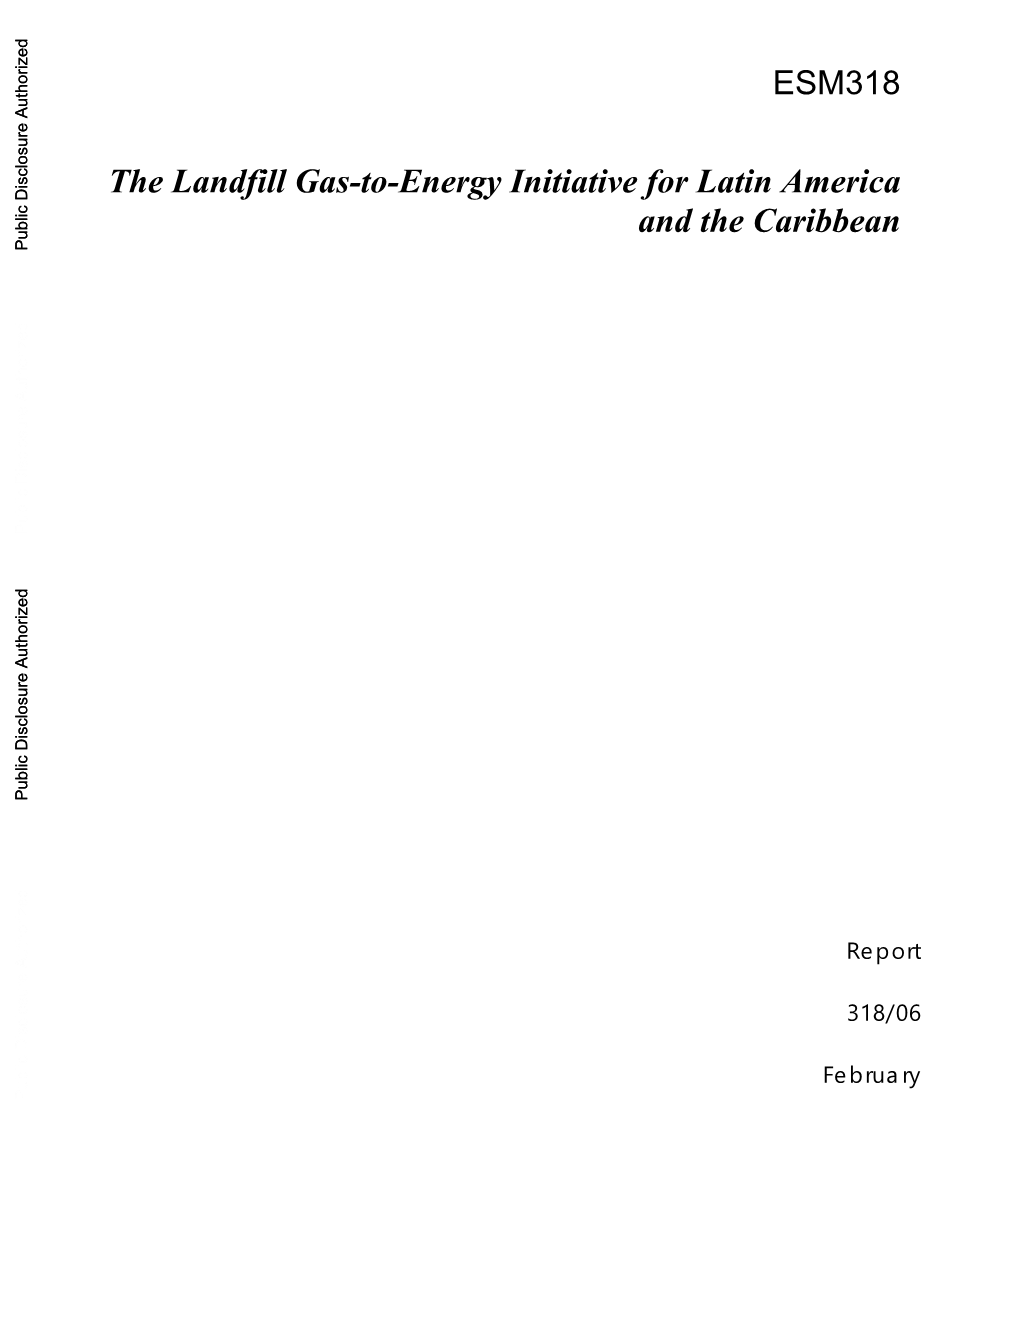 3 Landfill Gas-To-Energy Initiative